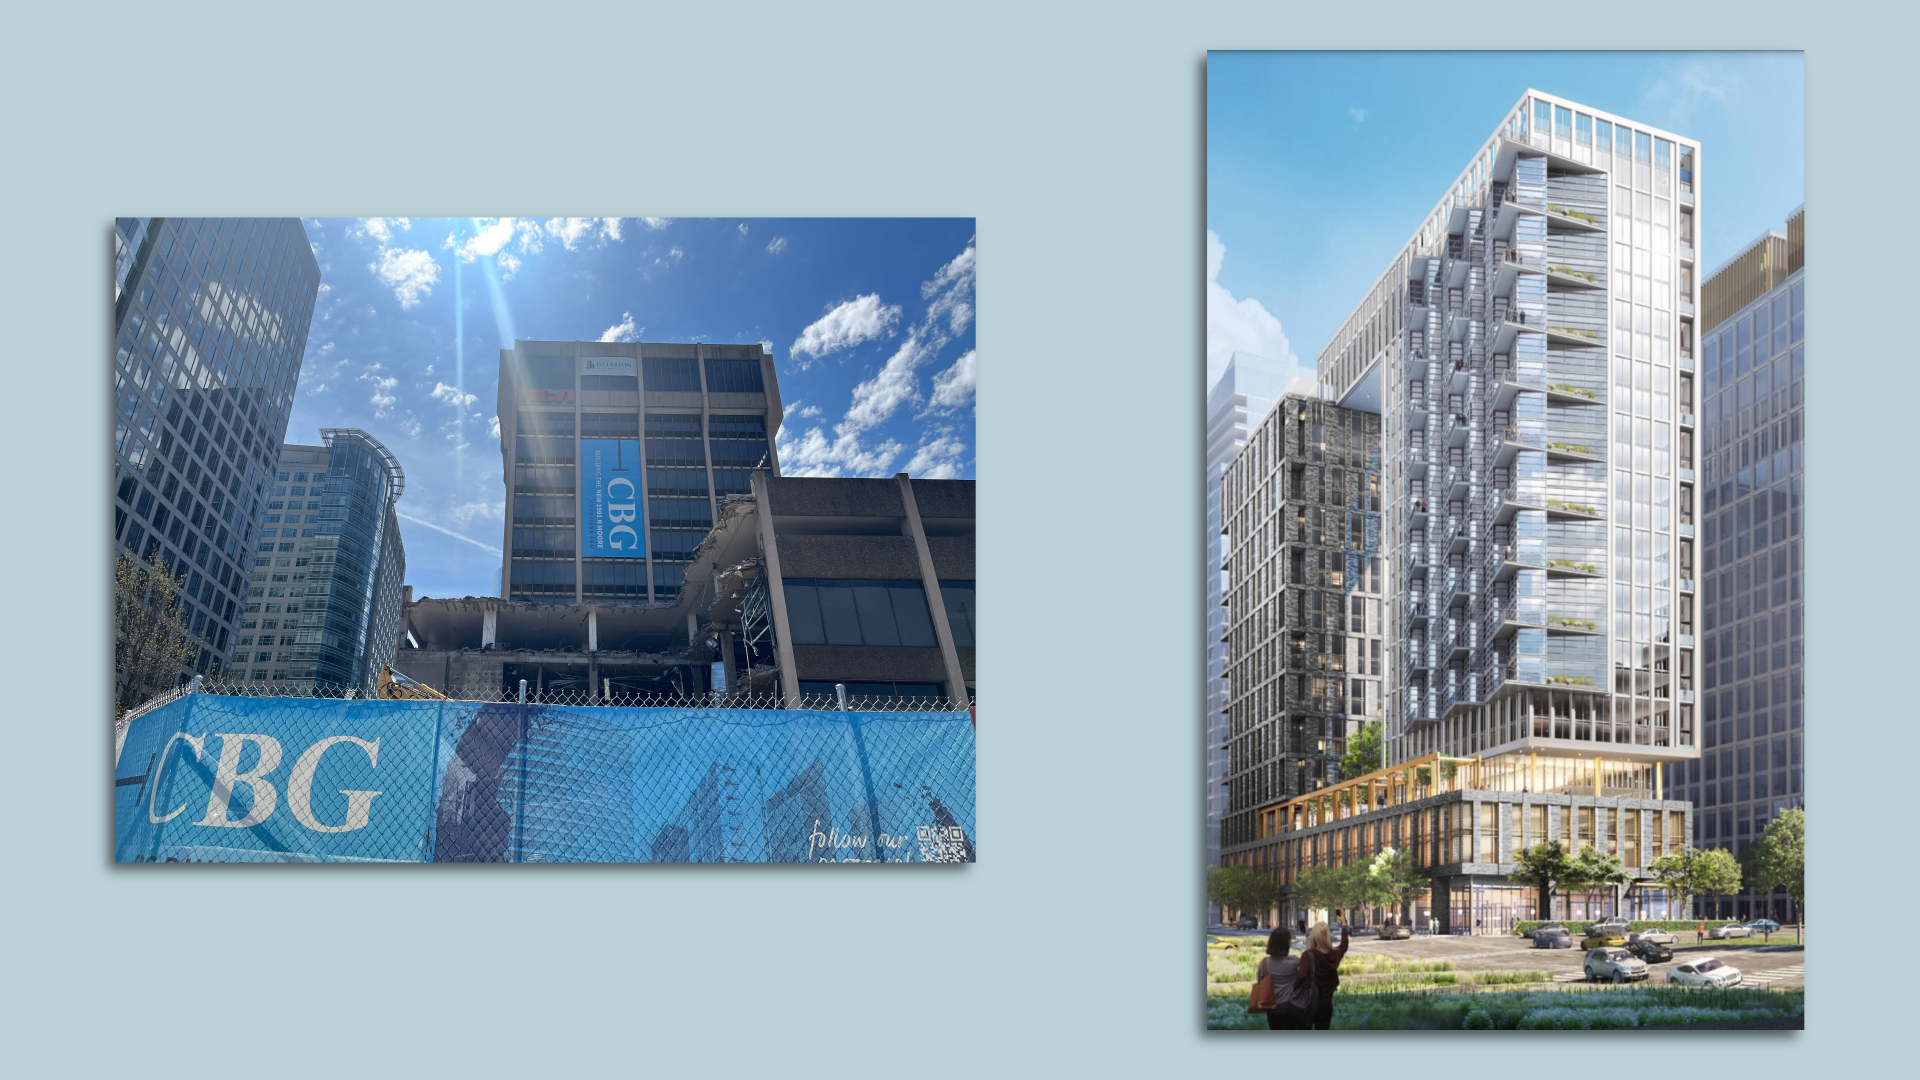 A side-by-side picture of a demolishing 1960s era building and a rendering of a new 27-story luxury tower